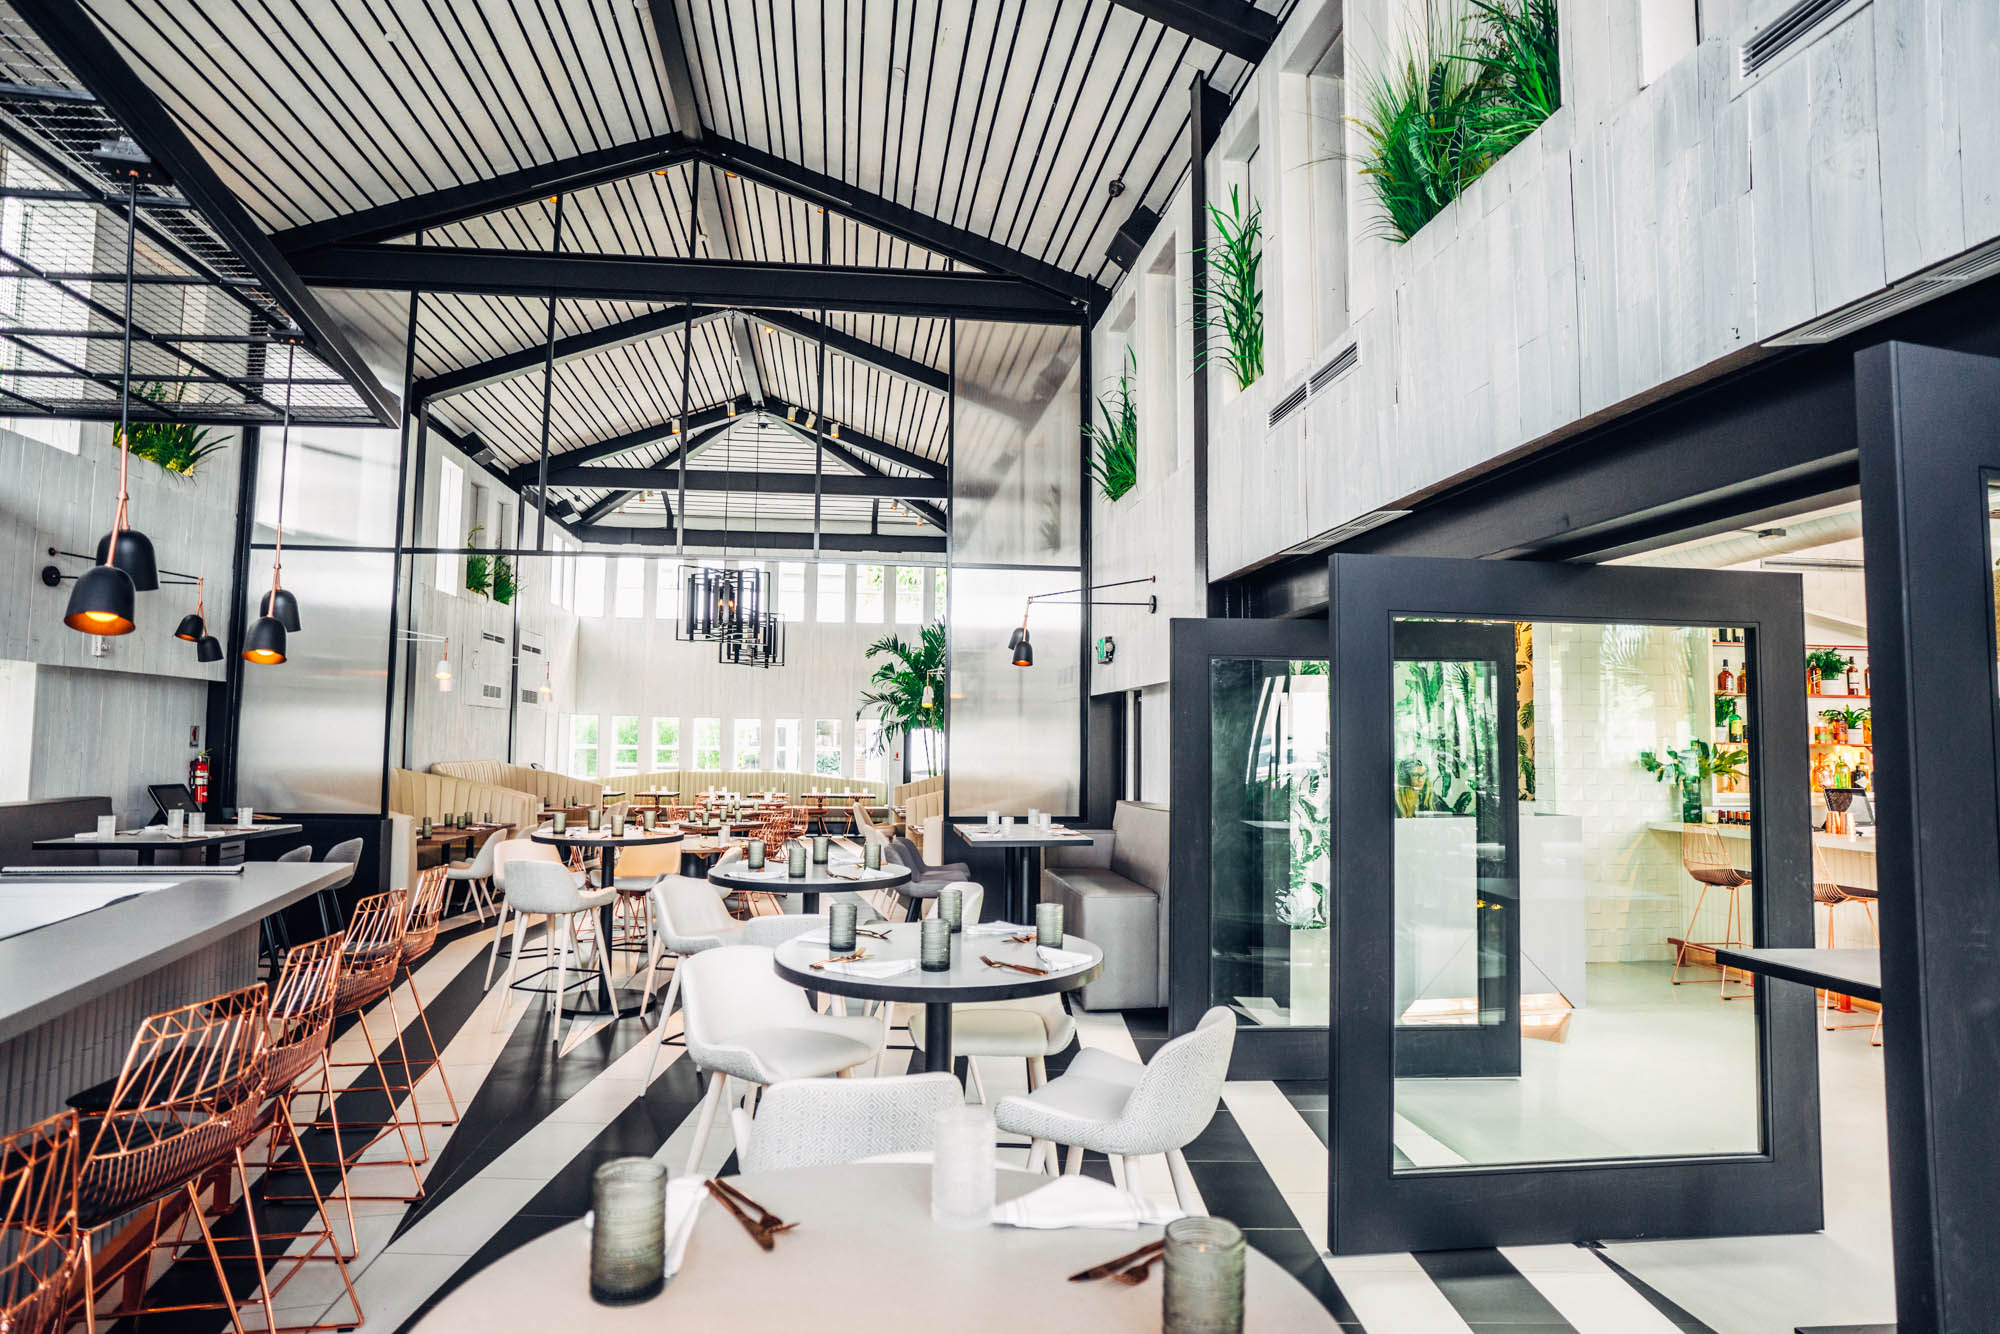 PLANTA, a vegetarian restaurant with locations in Toronto and South Beach, provides a feast for the palate and the eye. Our team loves the open, airy space and the bold geometric lines. Gift cards are available online for the Toronto location by clicking here. Stop by the South Beach location to purchase a gift card. If you’re looking for a festive and cruelty-free way to ring in the New Year, Planta is accepting reservations for a special New Year’s Eve seating.